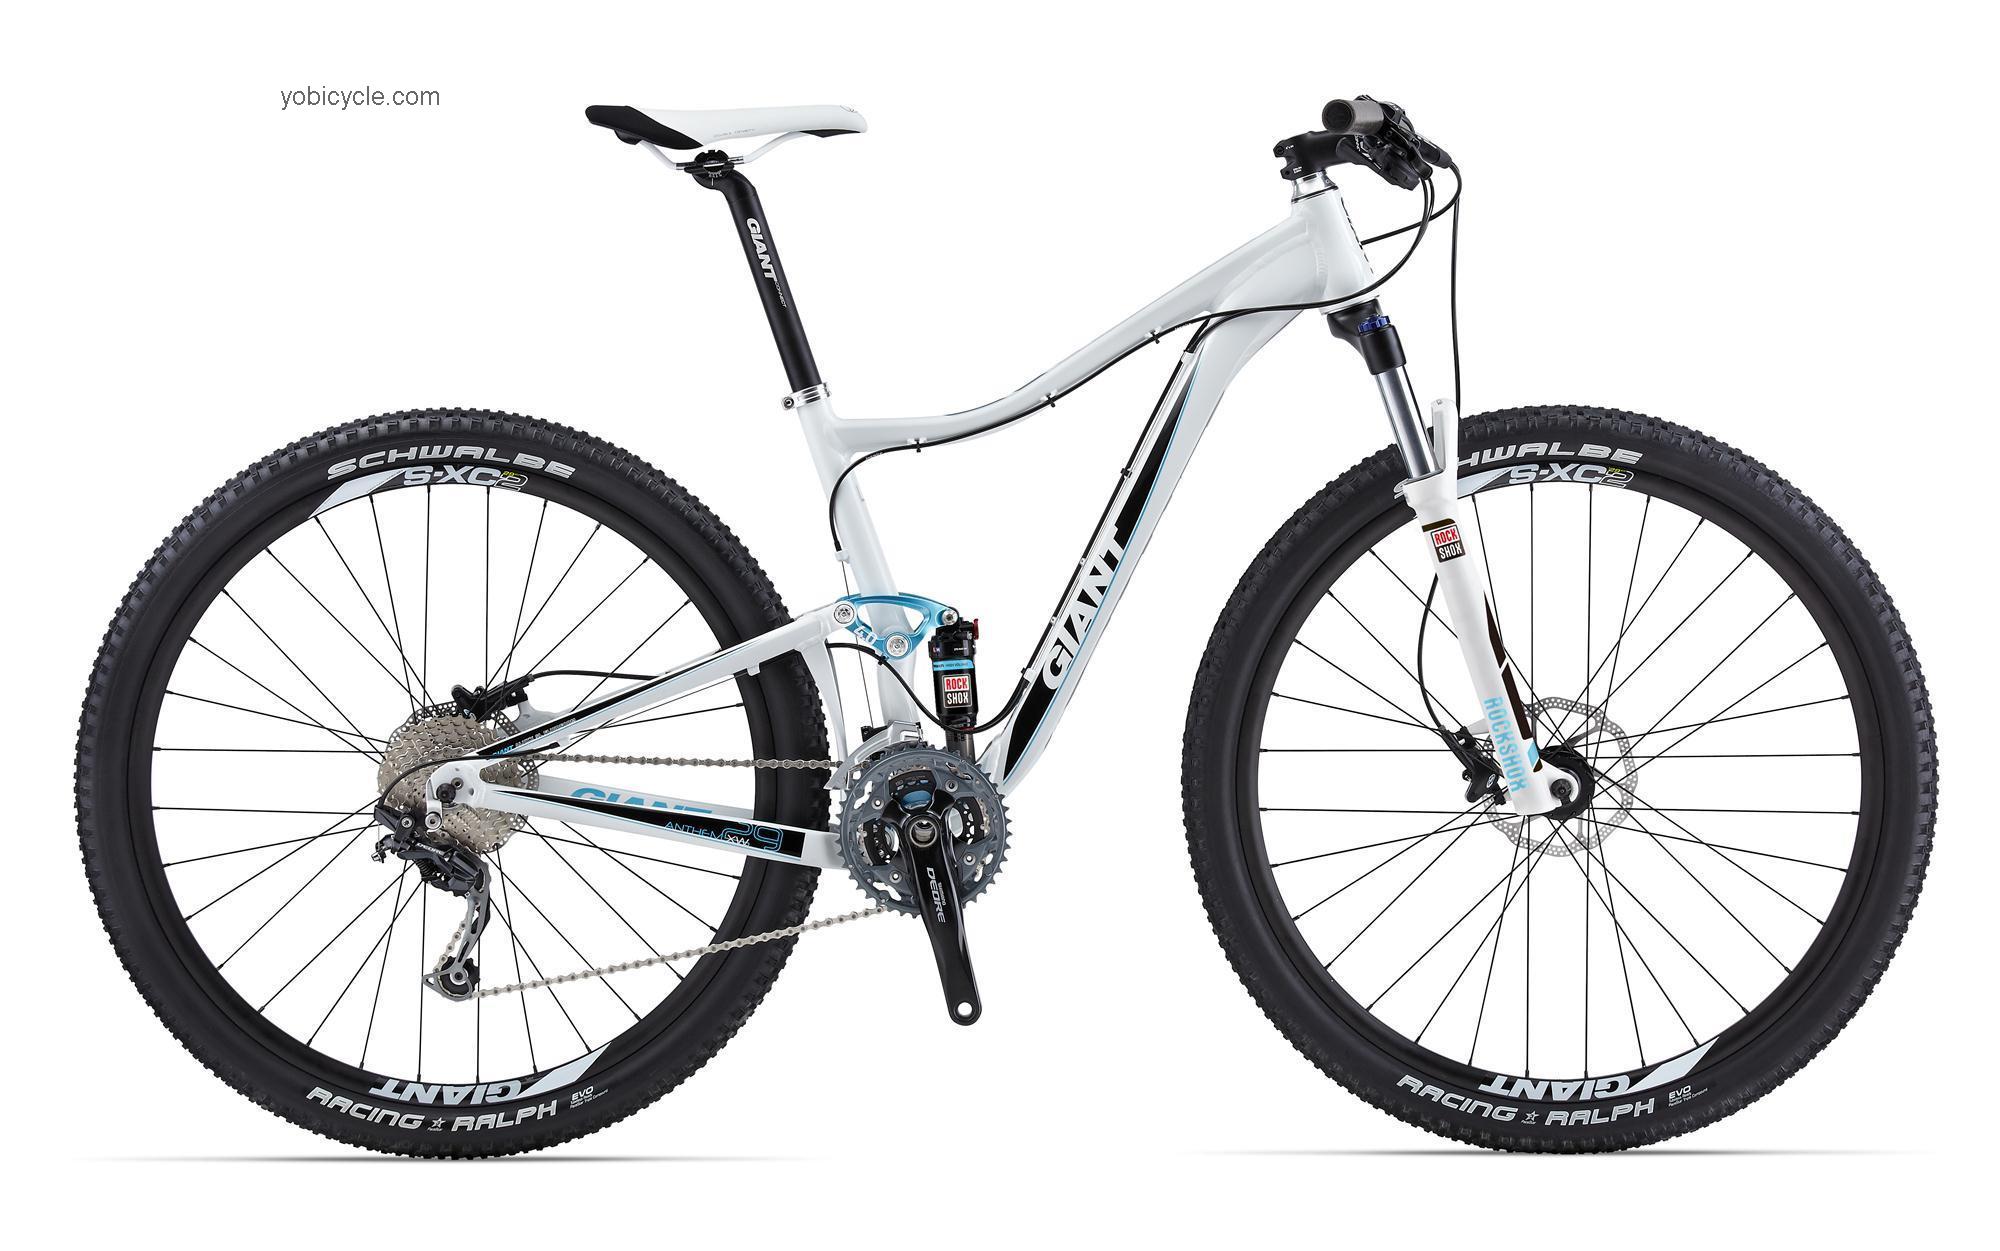 Giant Anthem X 29er 4 W 2013 comparison online with competitors